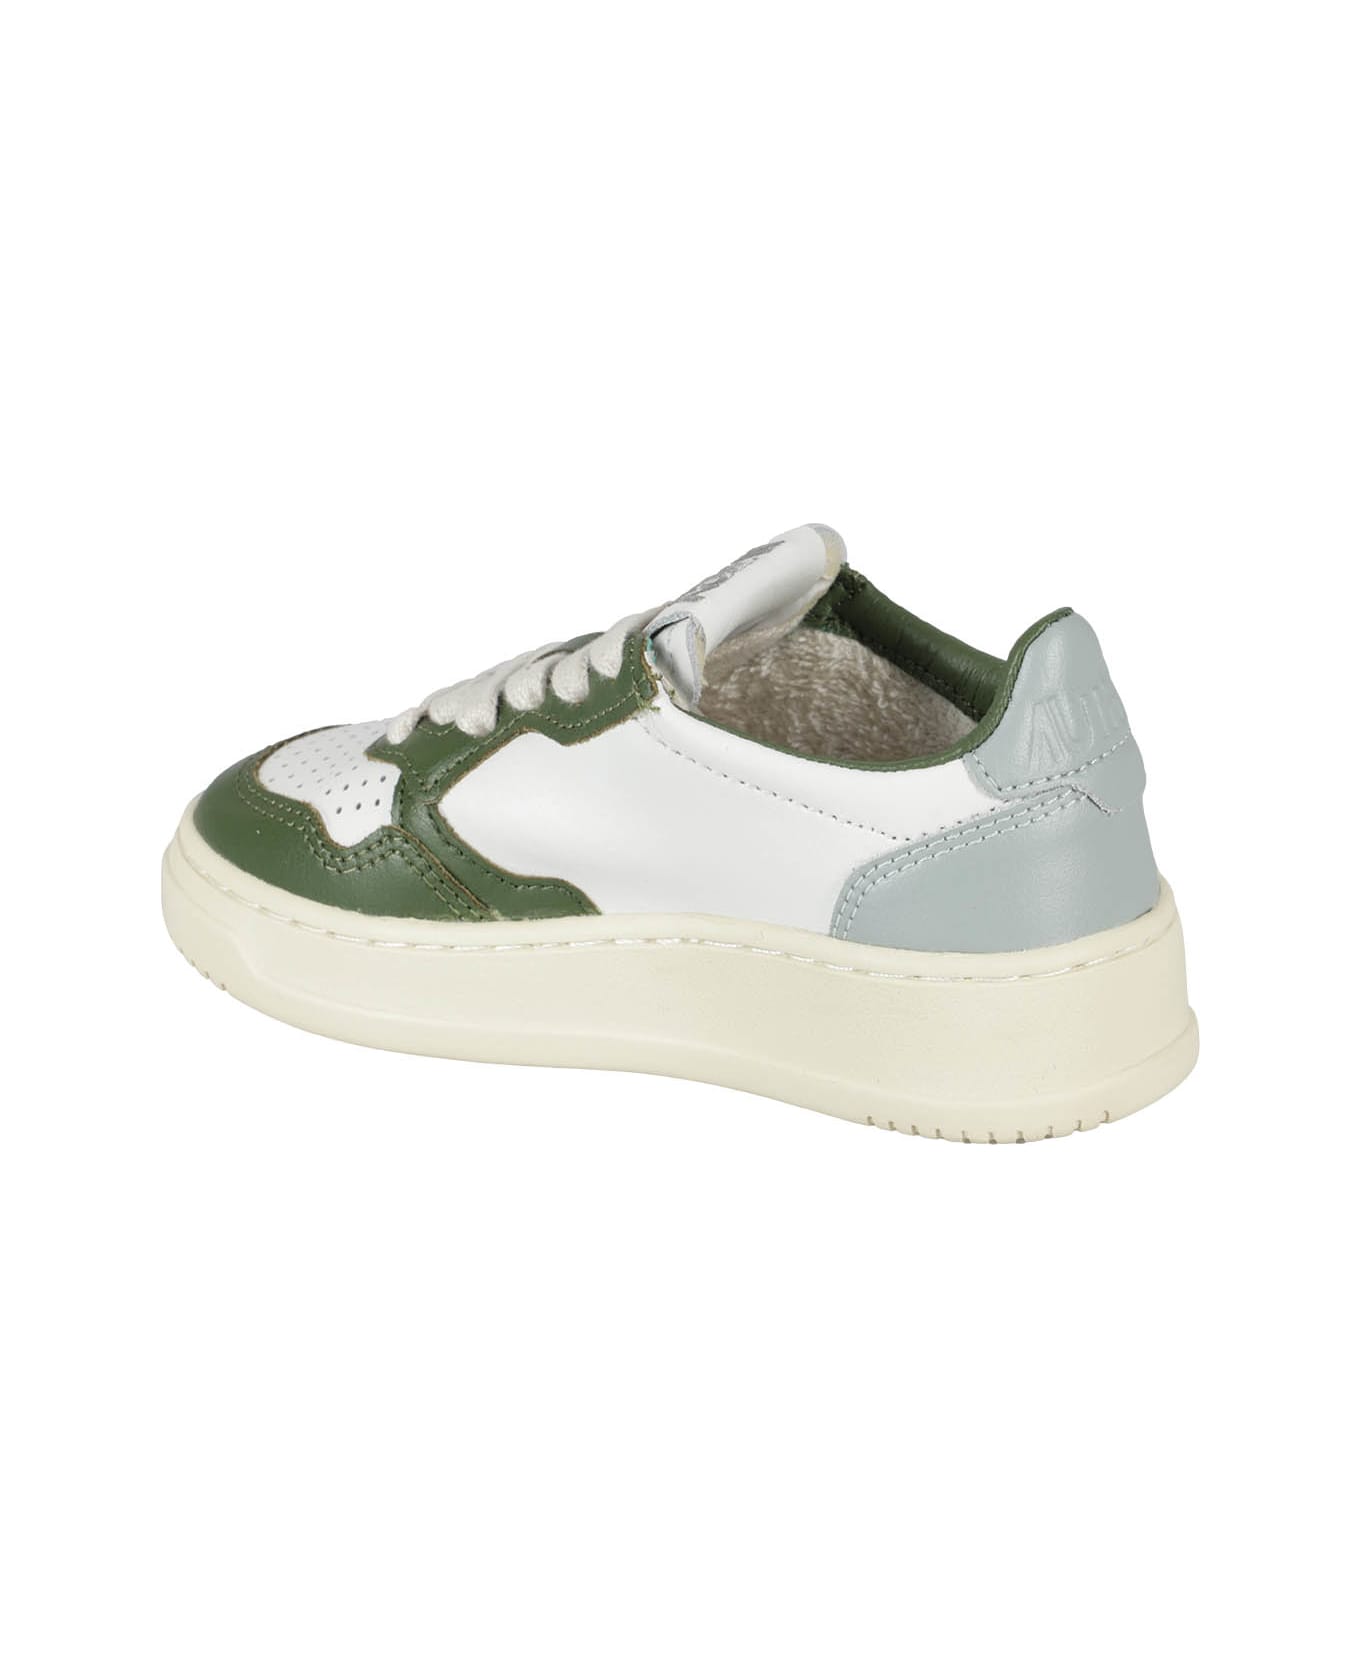 Autry Medalist - Grey Military Green シューズ